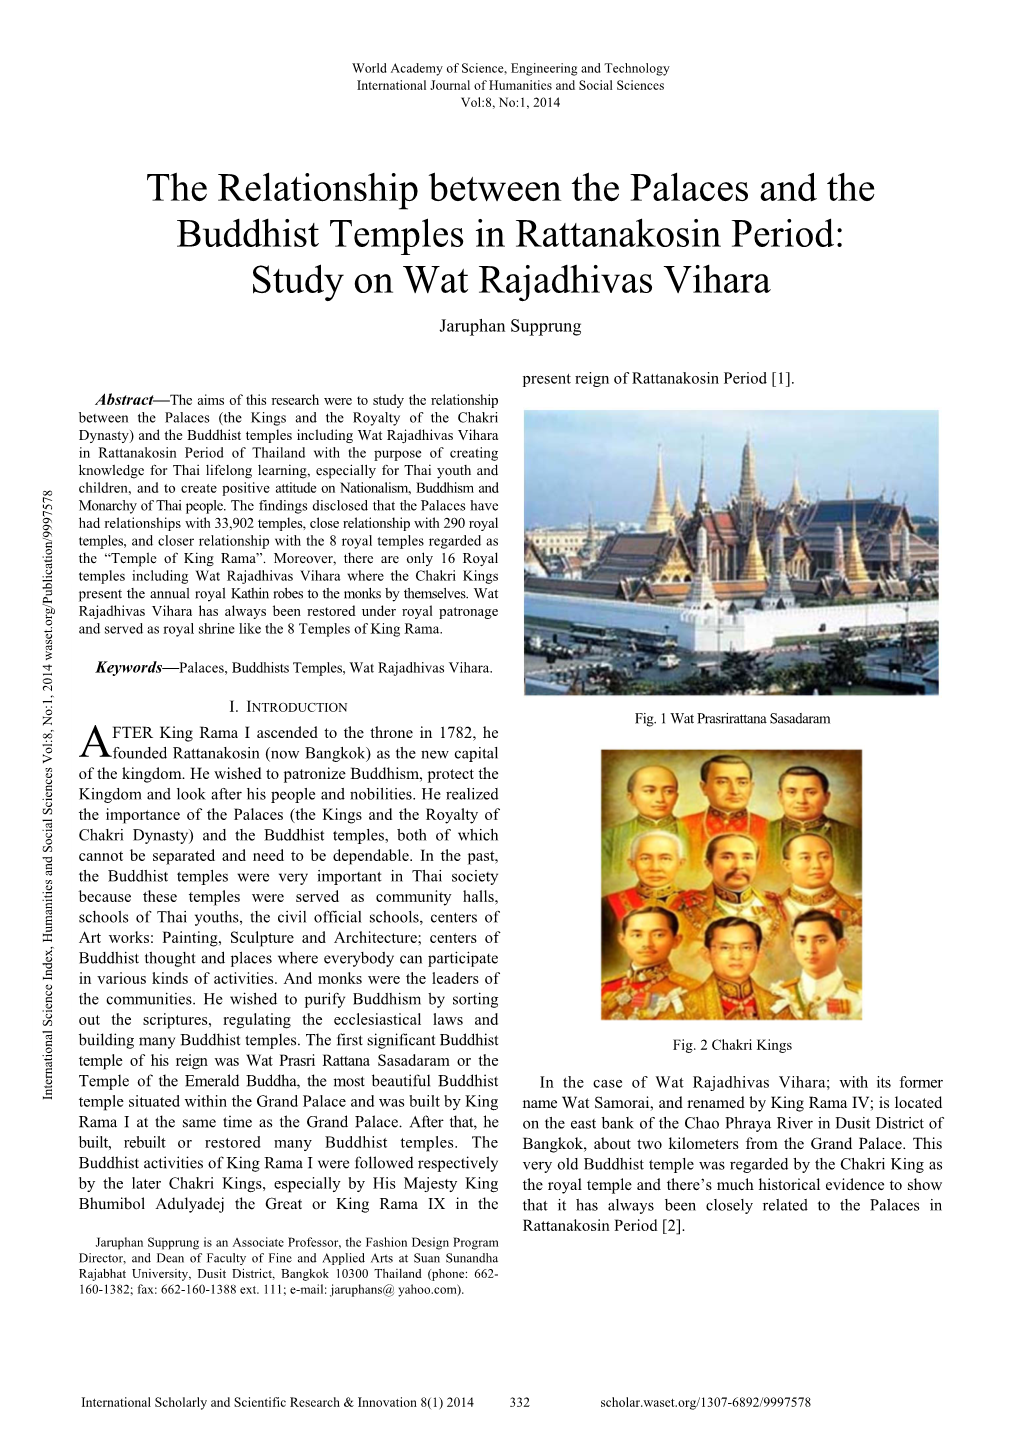 The Relationship Between the Palaces and the Buddhist Temples in Rattanakosin Period